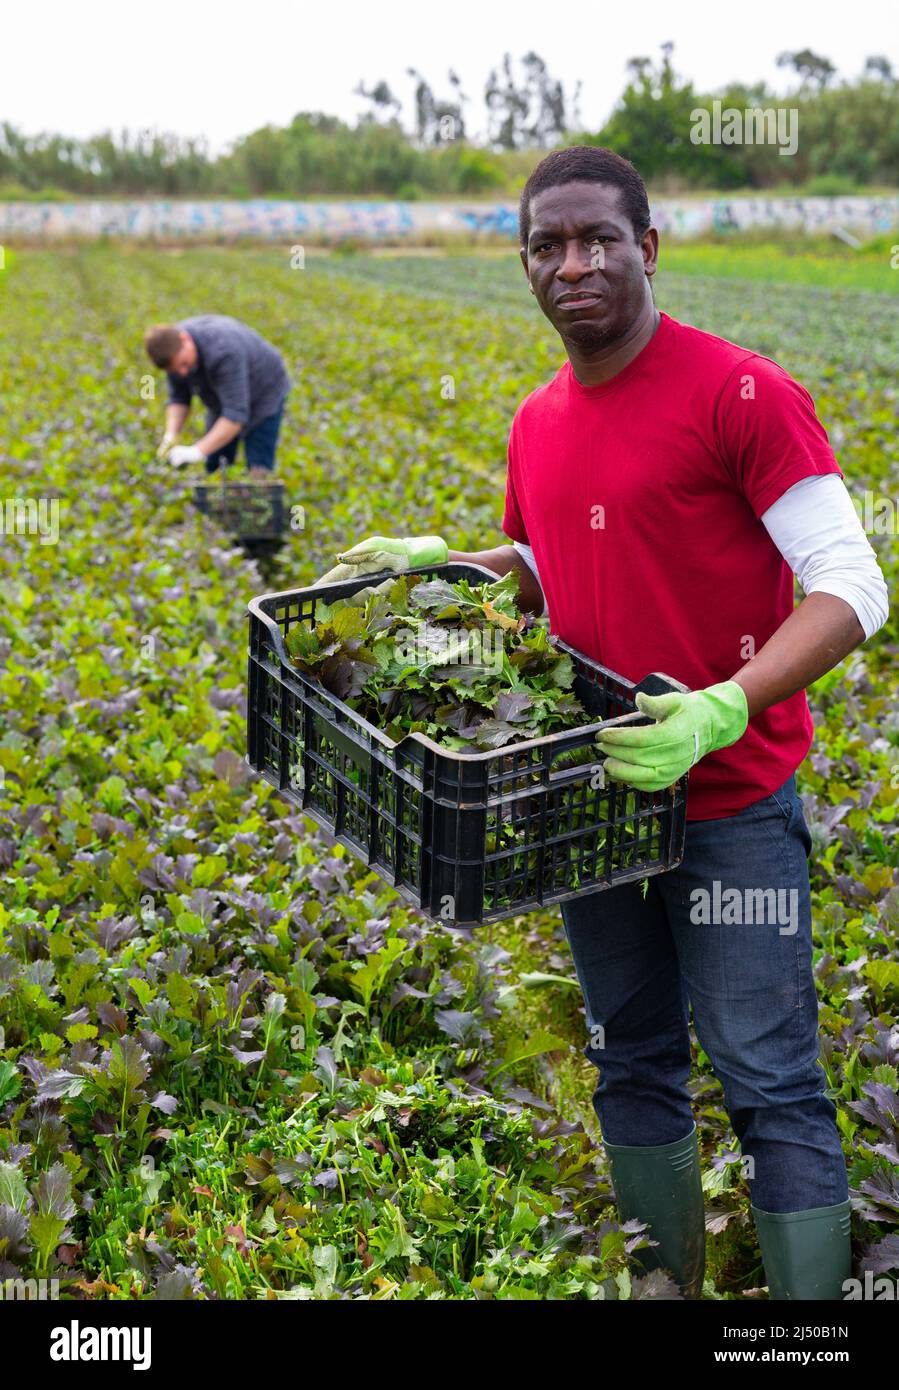 African american carrying box with gathered red mustard greens Stock Photo